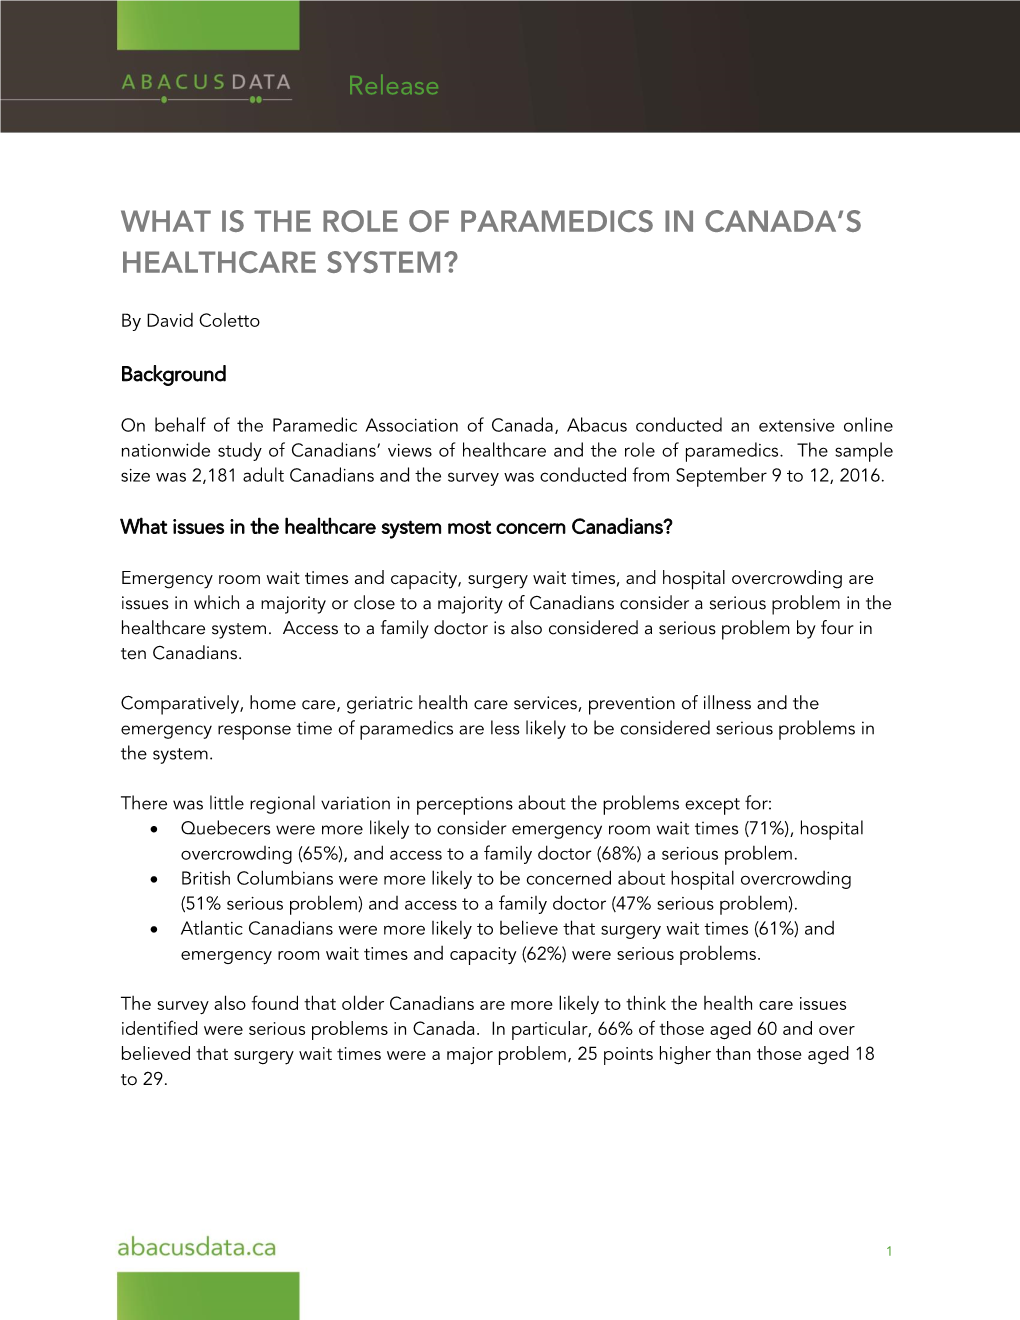 What Is the Role of Paramedics in Canada's